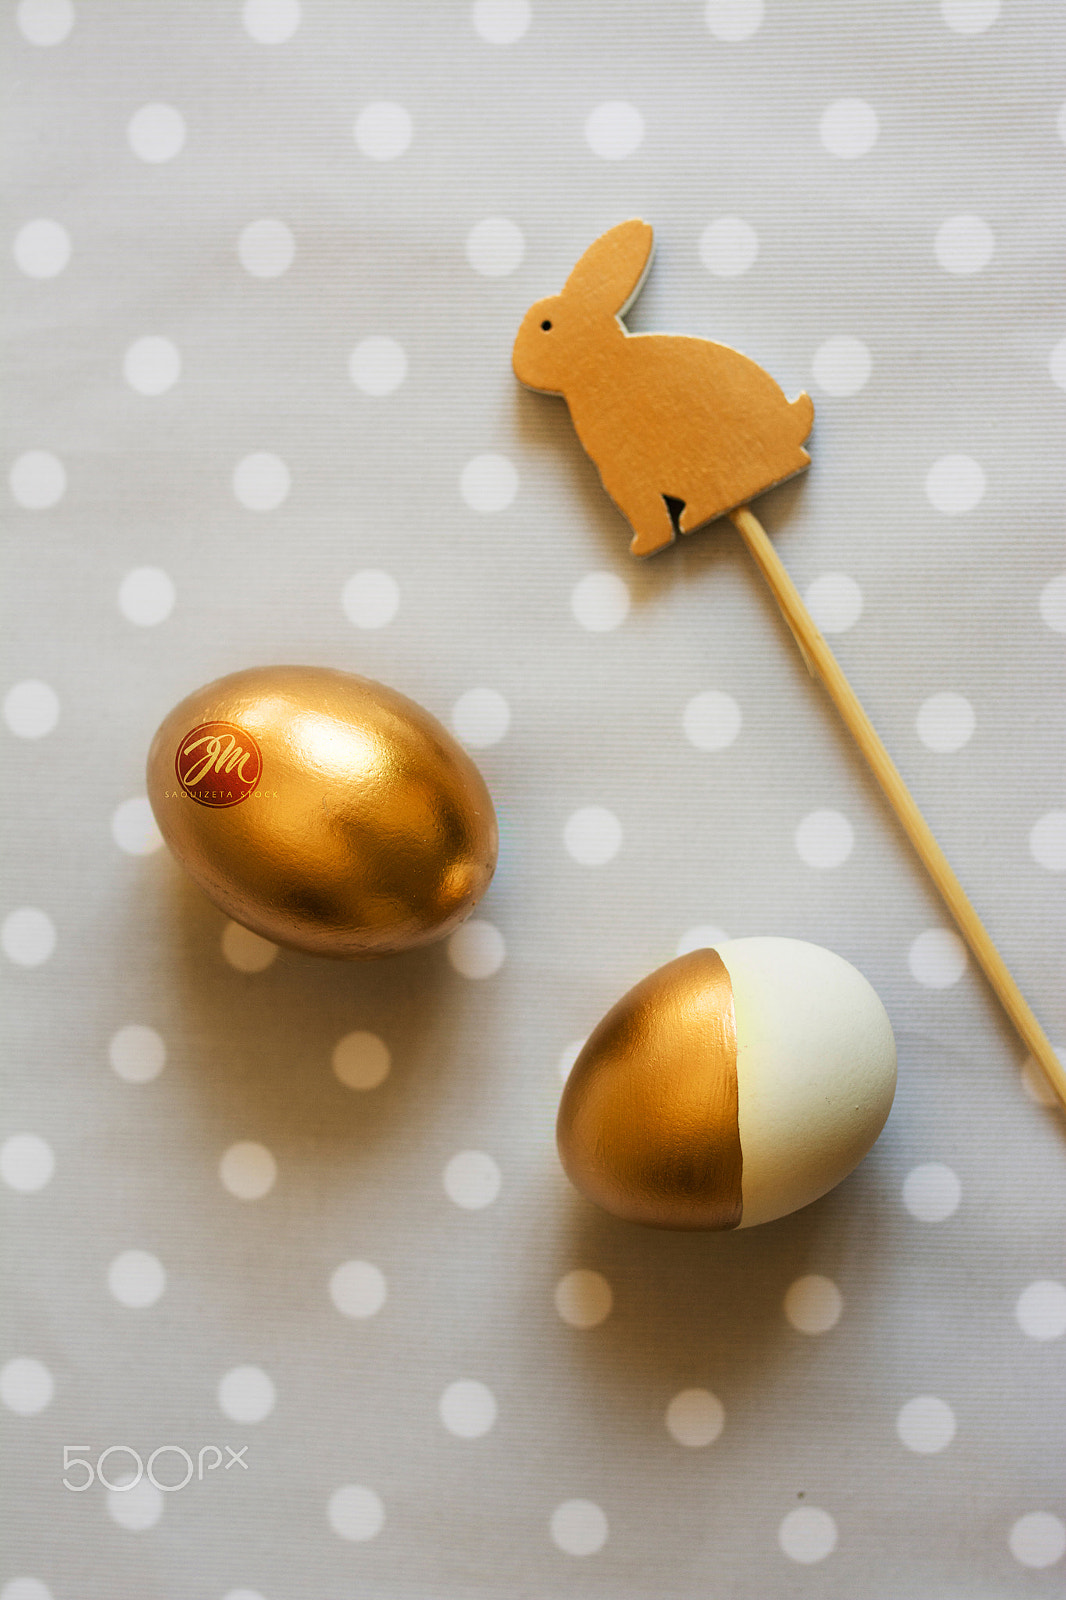 Nikon D7100 + Sigma 35mm F1.4 DG HSM Art sample photo. Gold easter eggs and wood rabbit decorated, from above photography